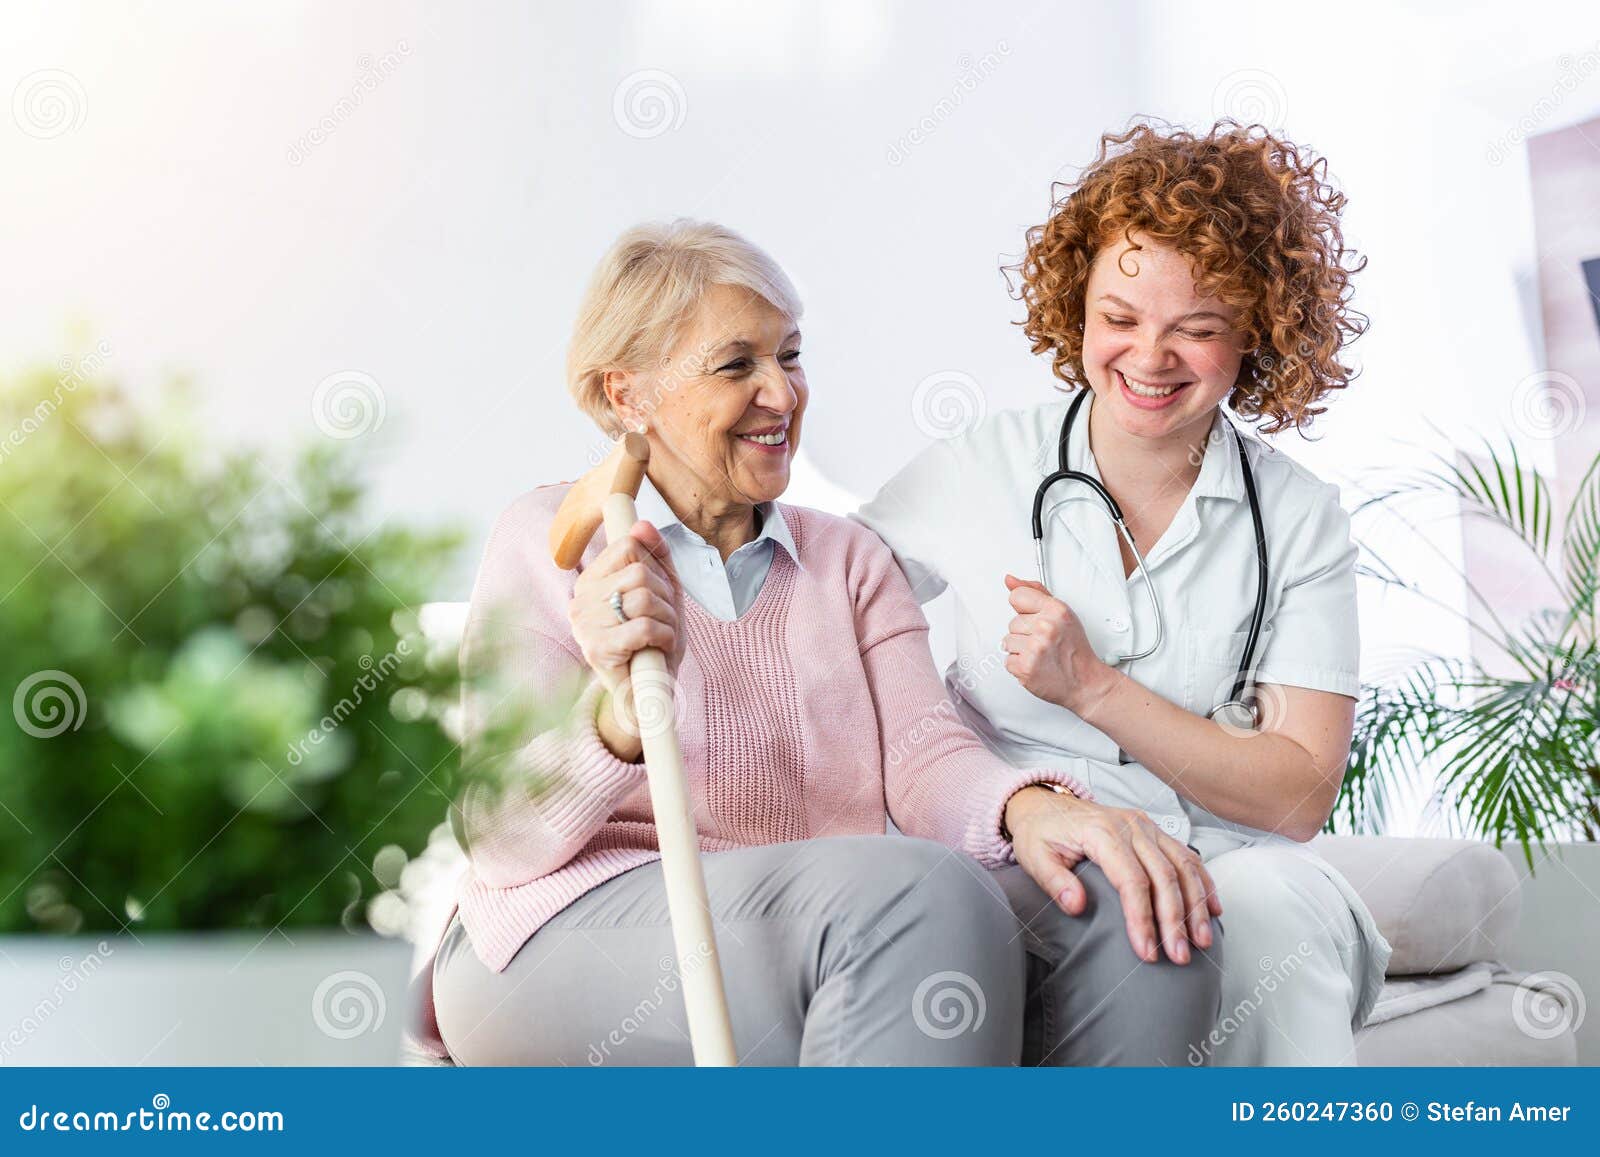 Friendly Relationship Between Smiling Caregiver In Uniform And Happy Elderly Woman Supportive